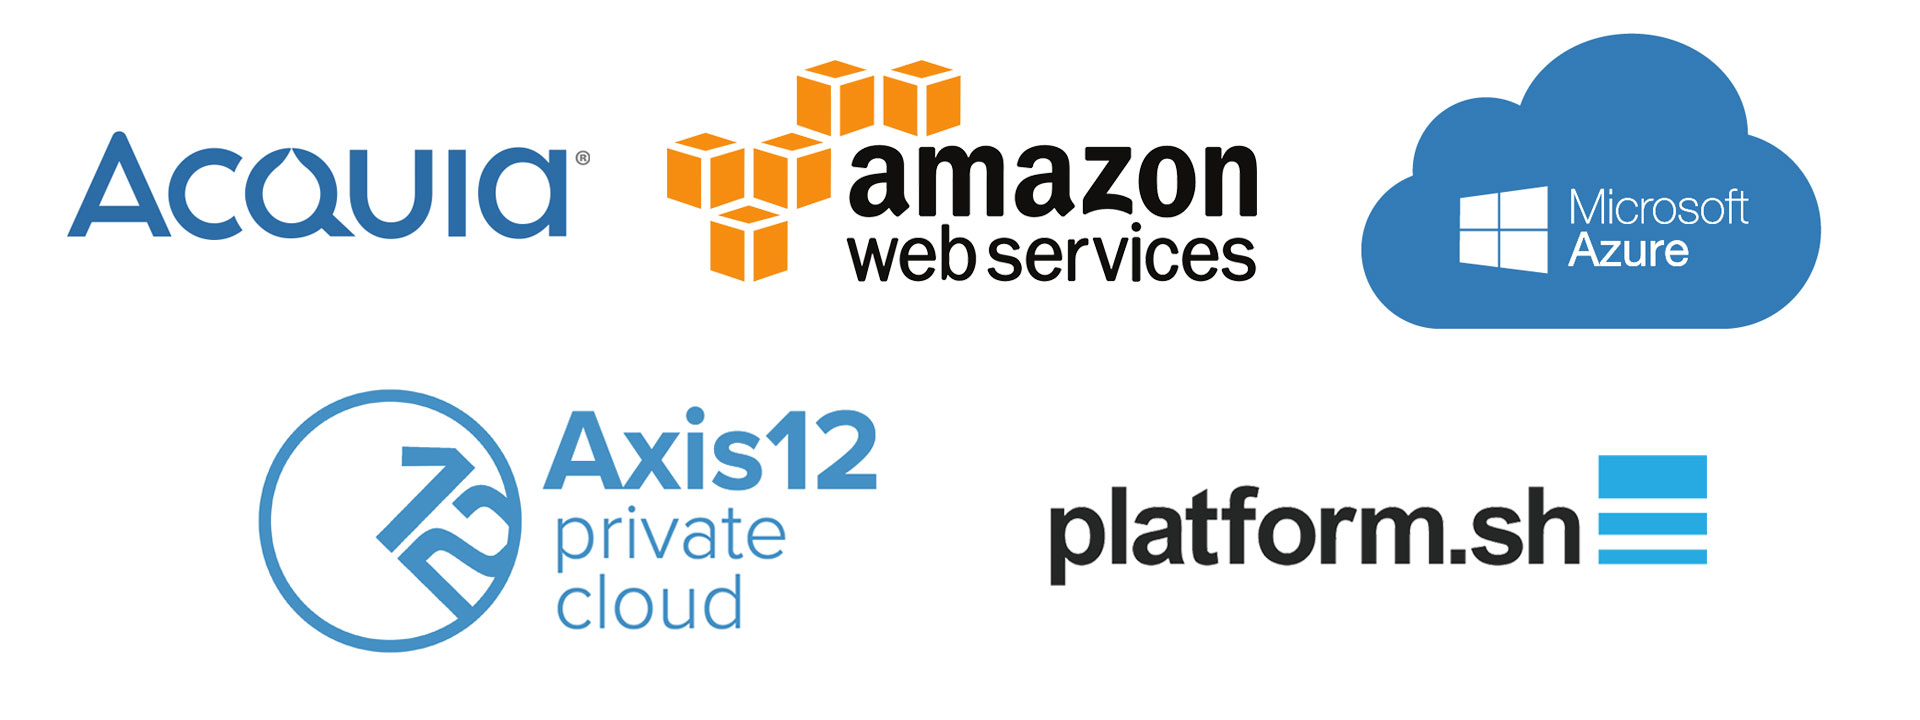 Acquia, Amazon Web Services, Microsoft Azure, Axis12 Private Cloud and Platform.sh logos